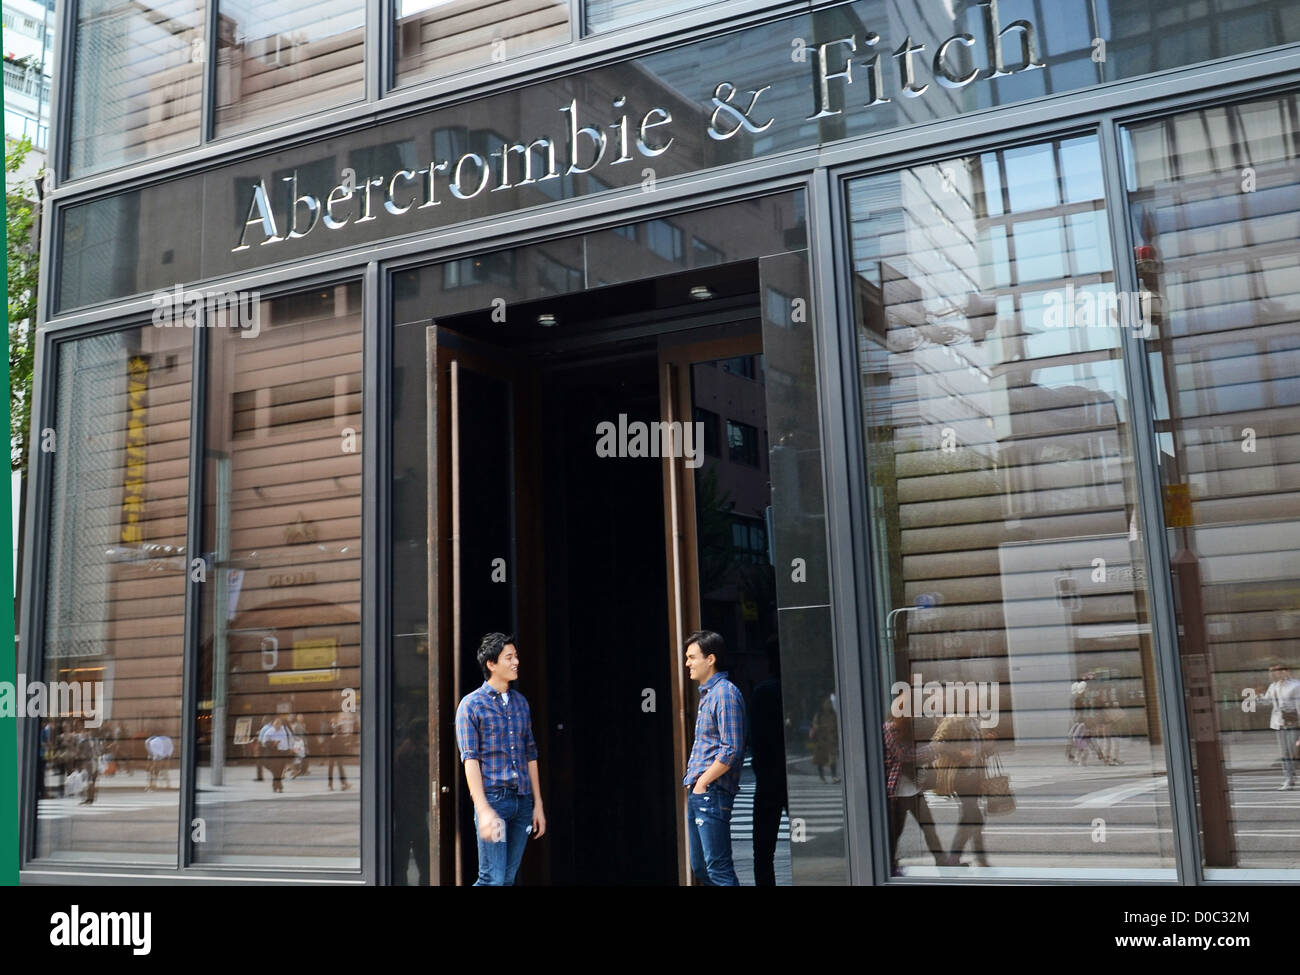 Abercrombie Street High Resolution Stock Photography and Images - Alamy